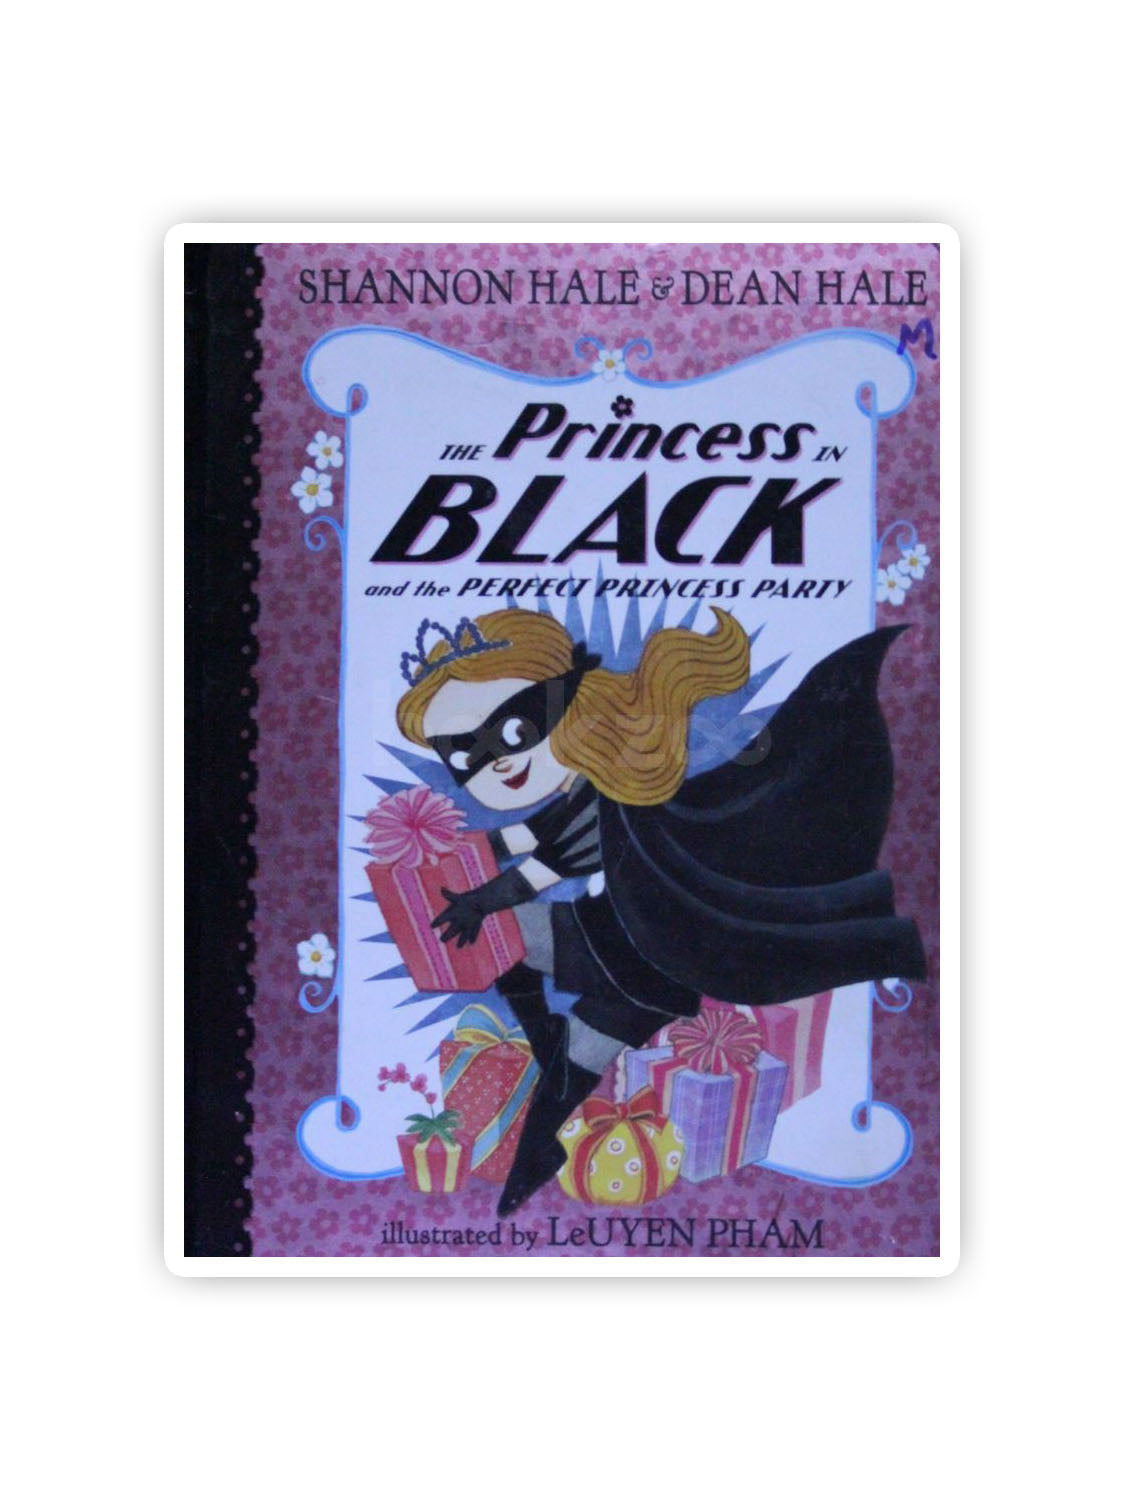 The princess in black perfect party 洋書　本